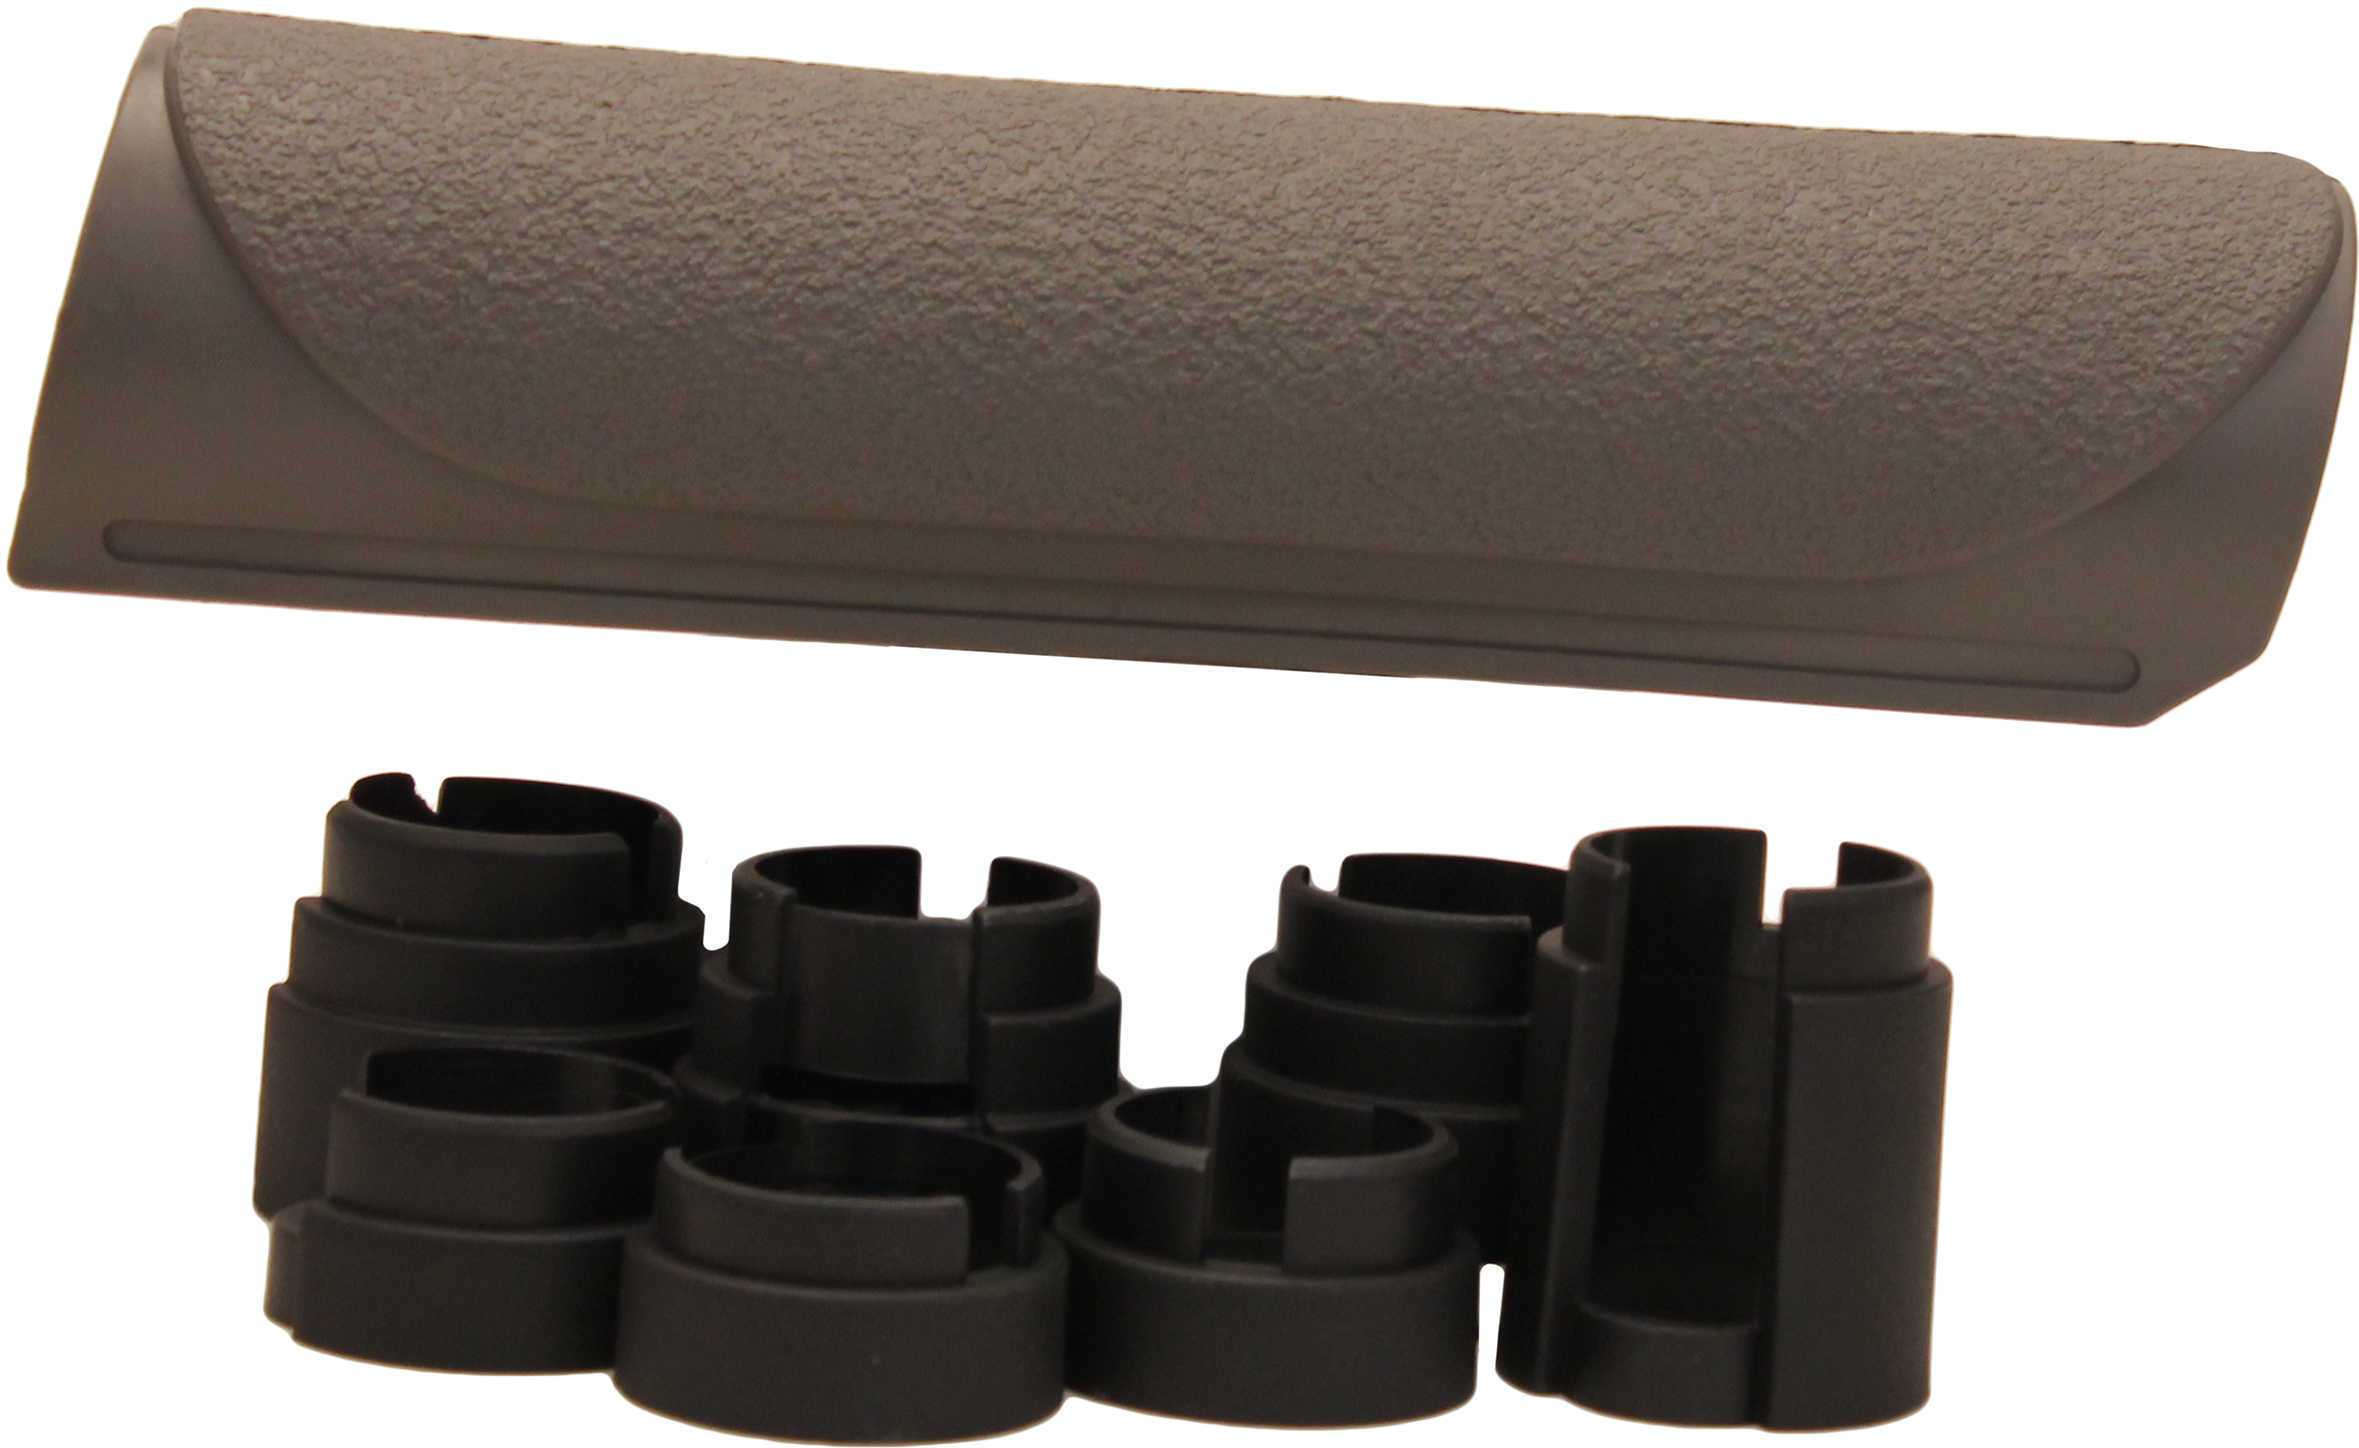 Advanced Technology Intl. Mossberg/Remington/Winchester 12 Gauge Akita Forend Destroyer Gray Md: A.5.40.2532